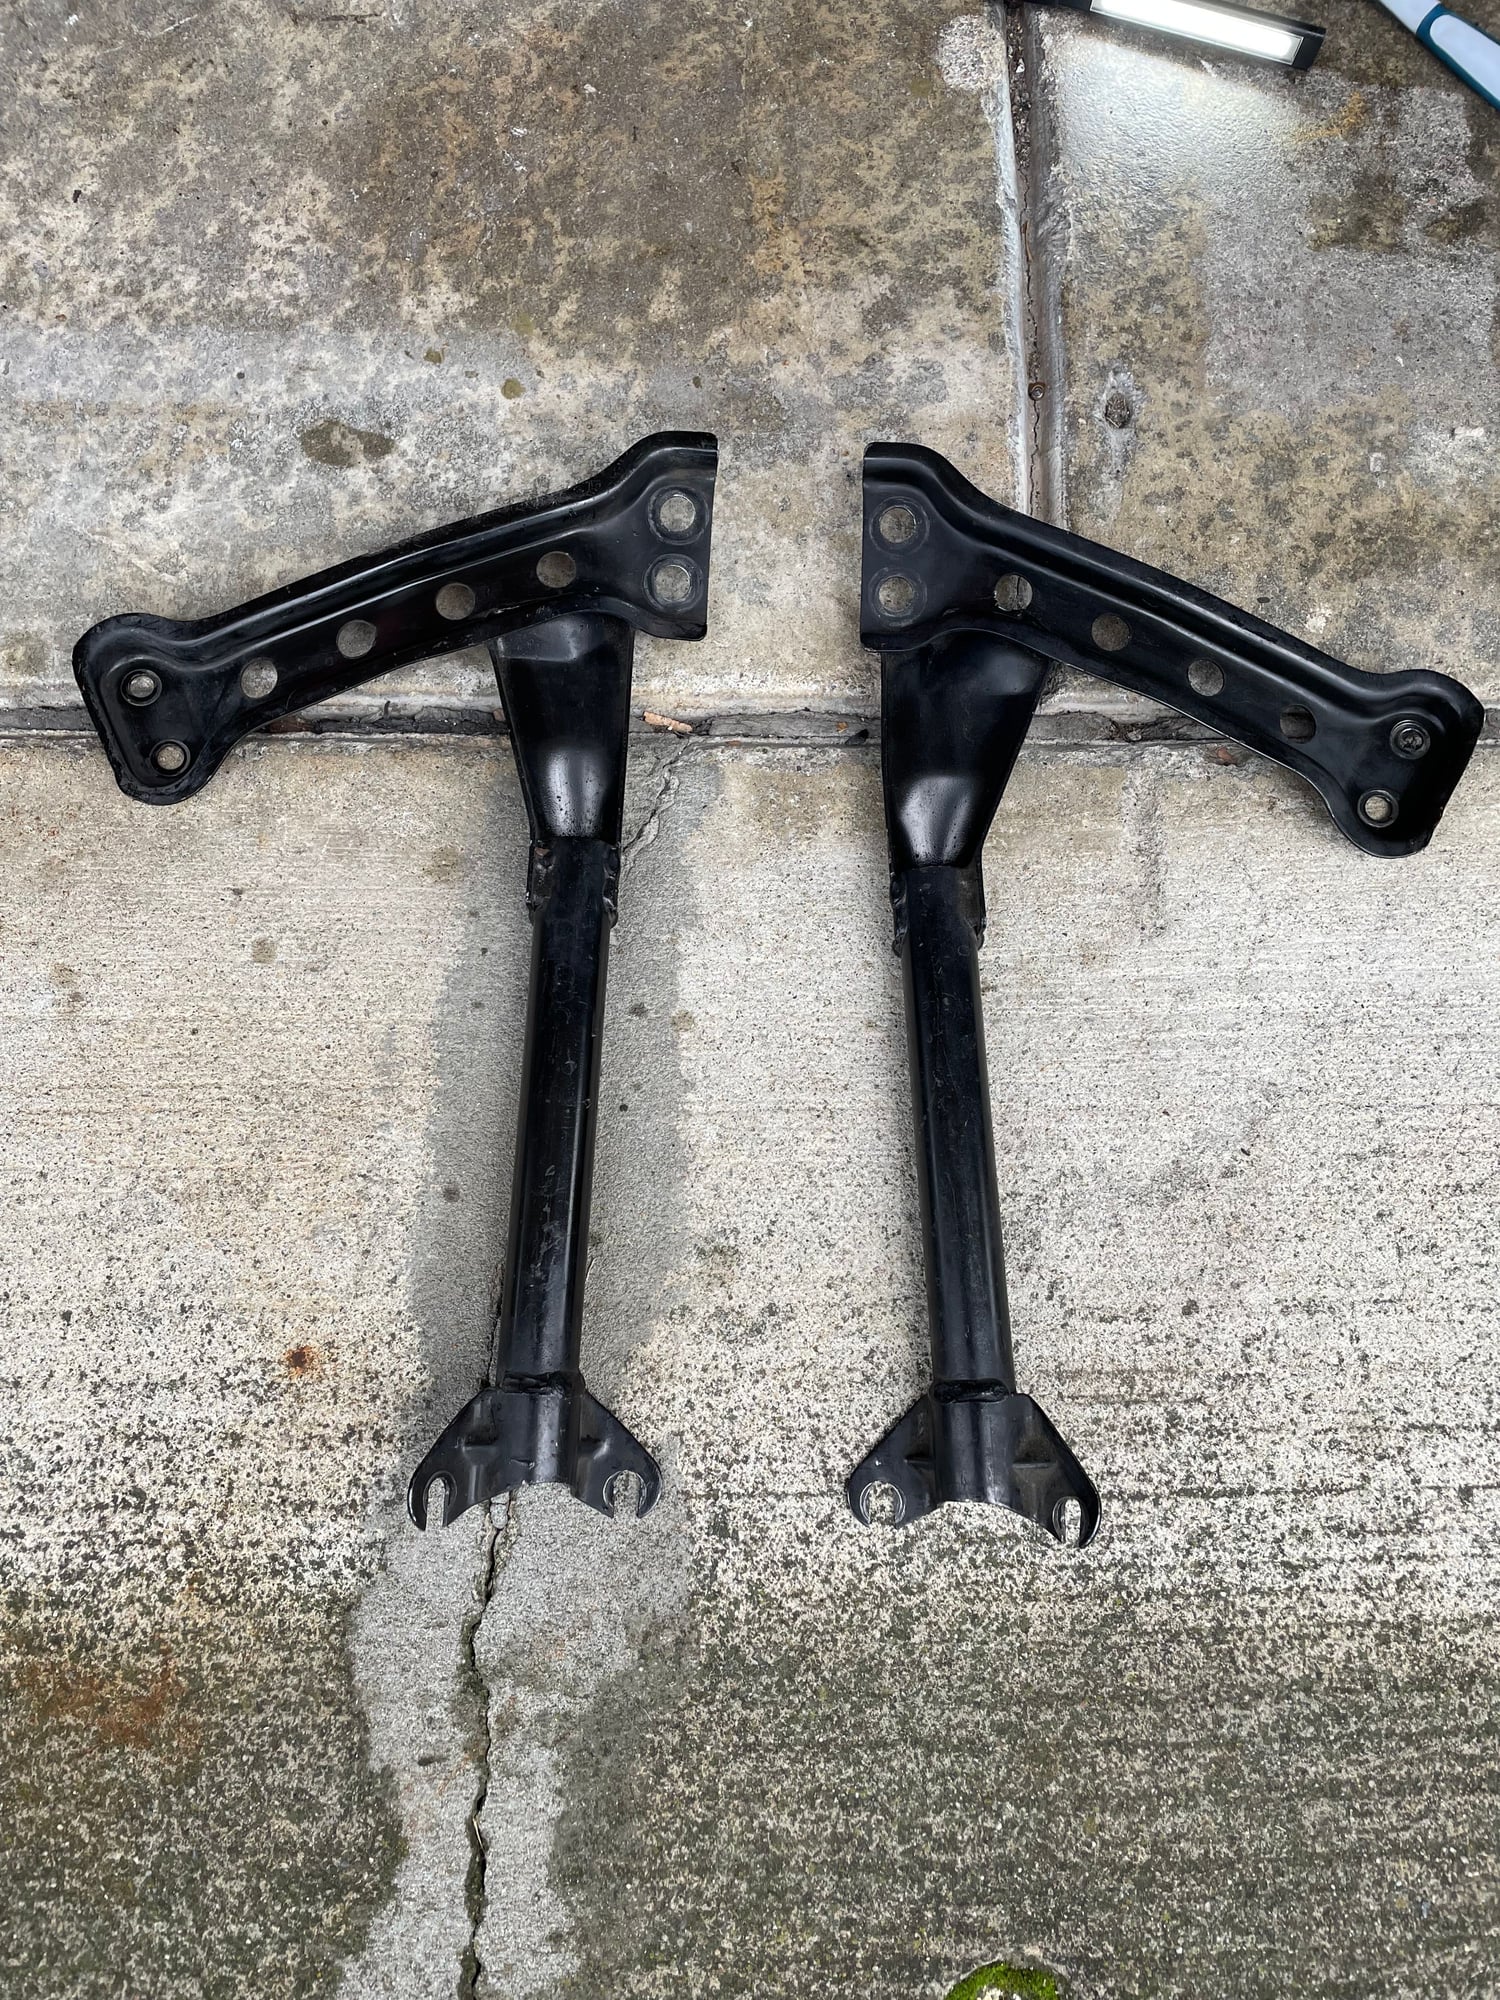 Steering/Suspension - FS: 94-95 rear subframe reinforcements - Used - 1993 to 2002 Mazda RX-7 - San Jose, CA 95050, United States